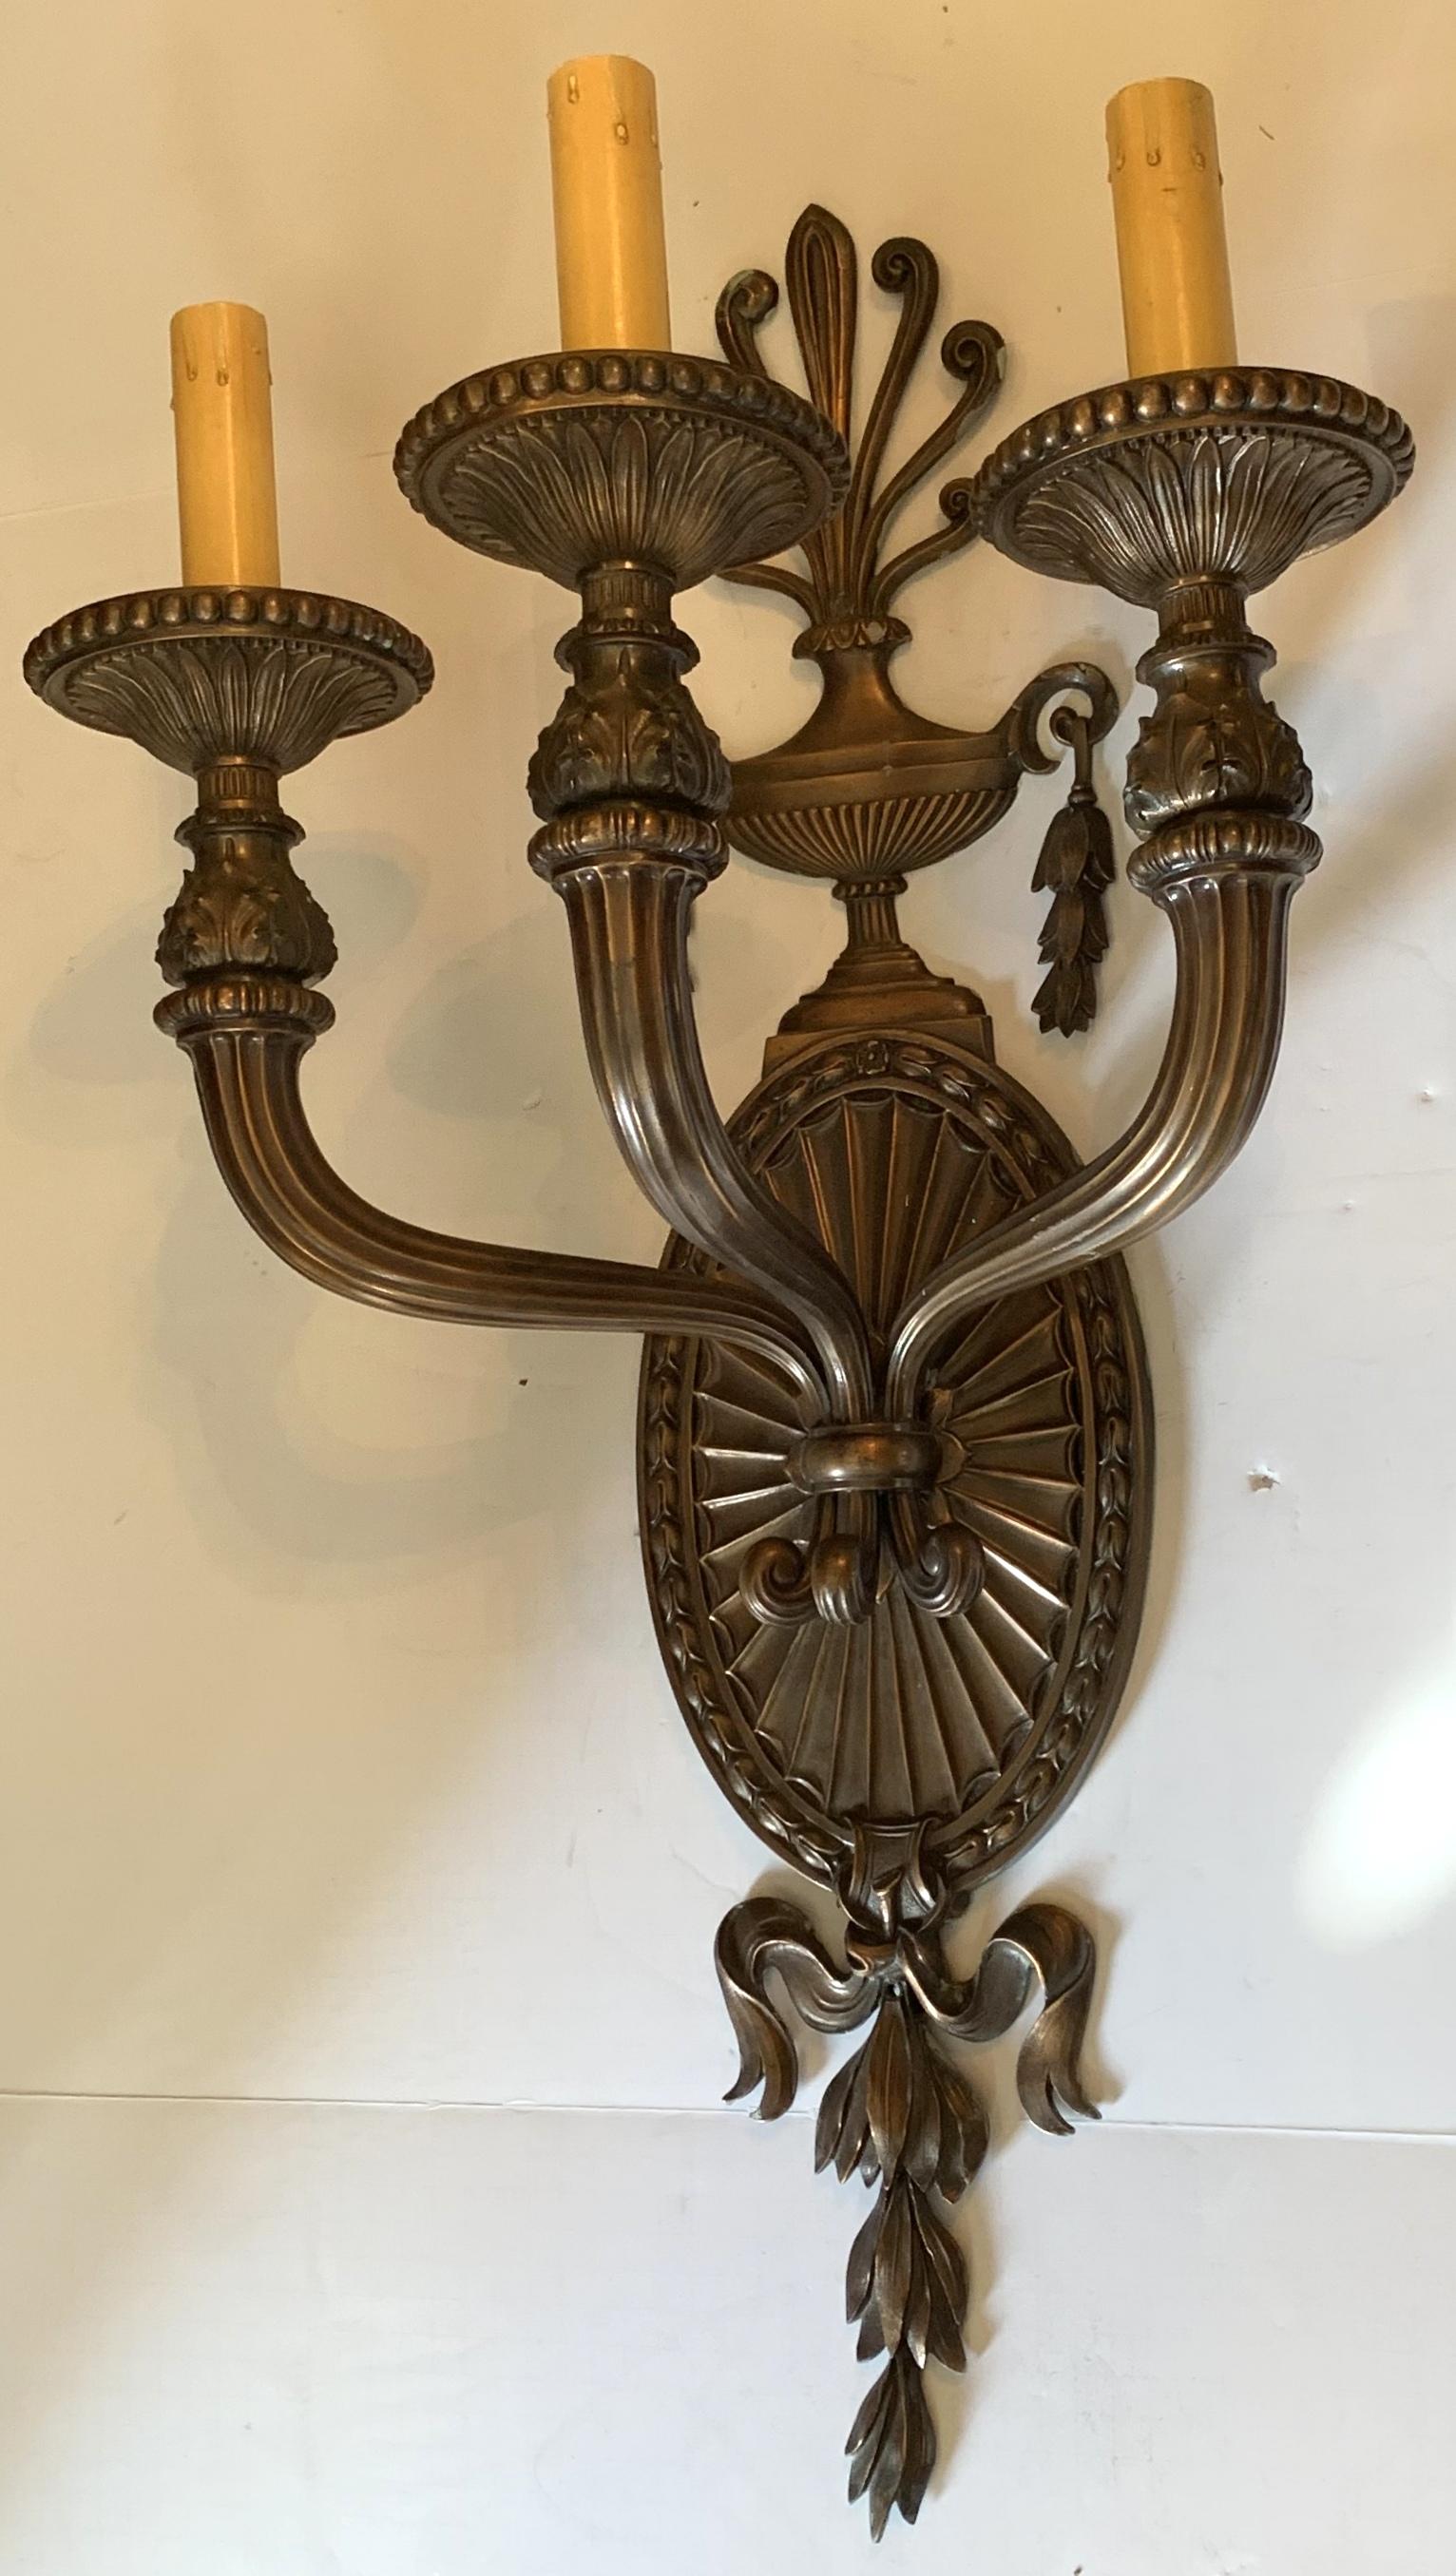 A wonderful neoclassical pair of patinated bronze large urn form top and oval back 3 light sconces rewired and ready to enjoy, very fine cast and detail.
We have had this model sconces by Caldwell, but this pair is unsigned.